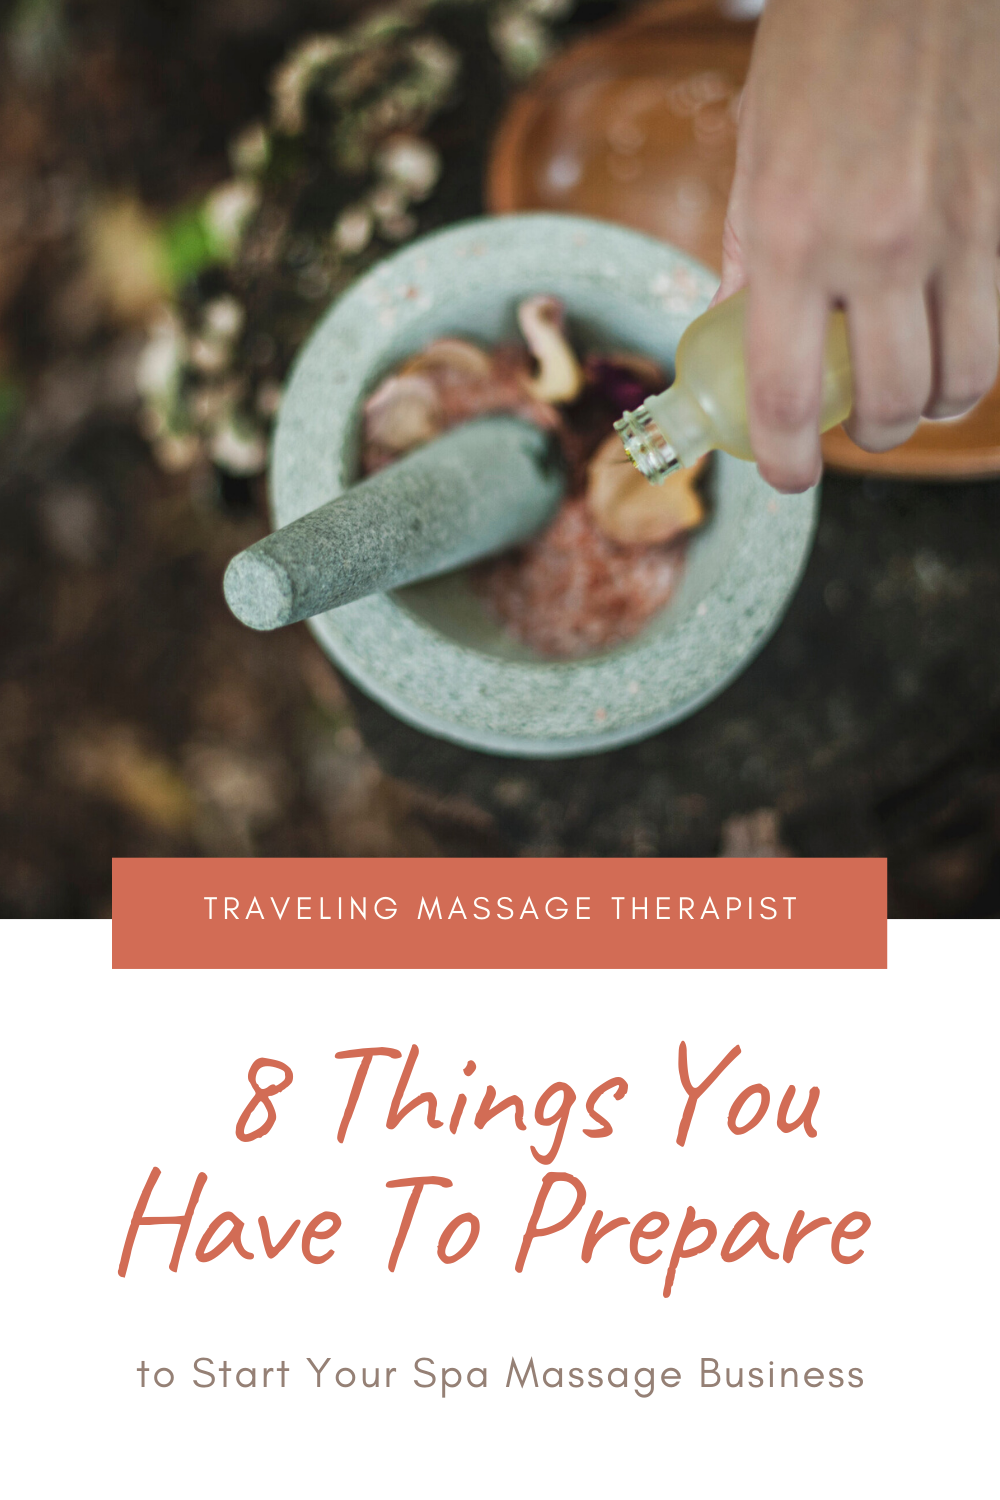 8 Things You Have To Prepare to Start Your Spa Massage Business as a Traveling Massage Therapist1.png